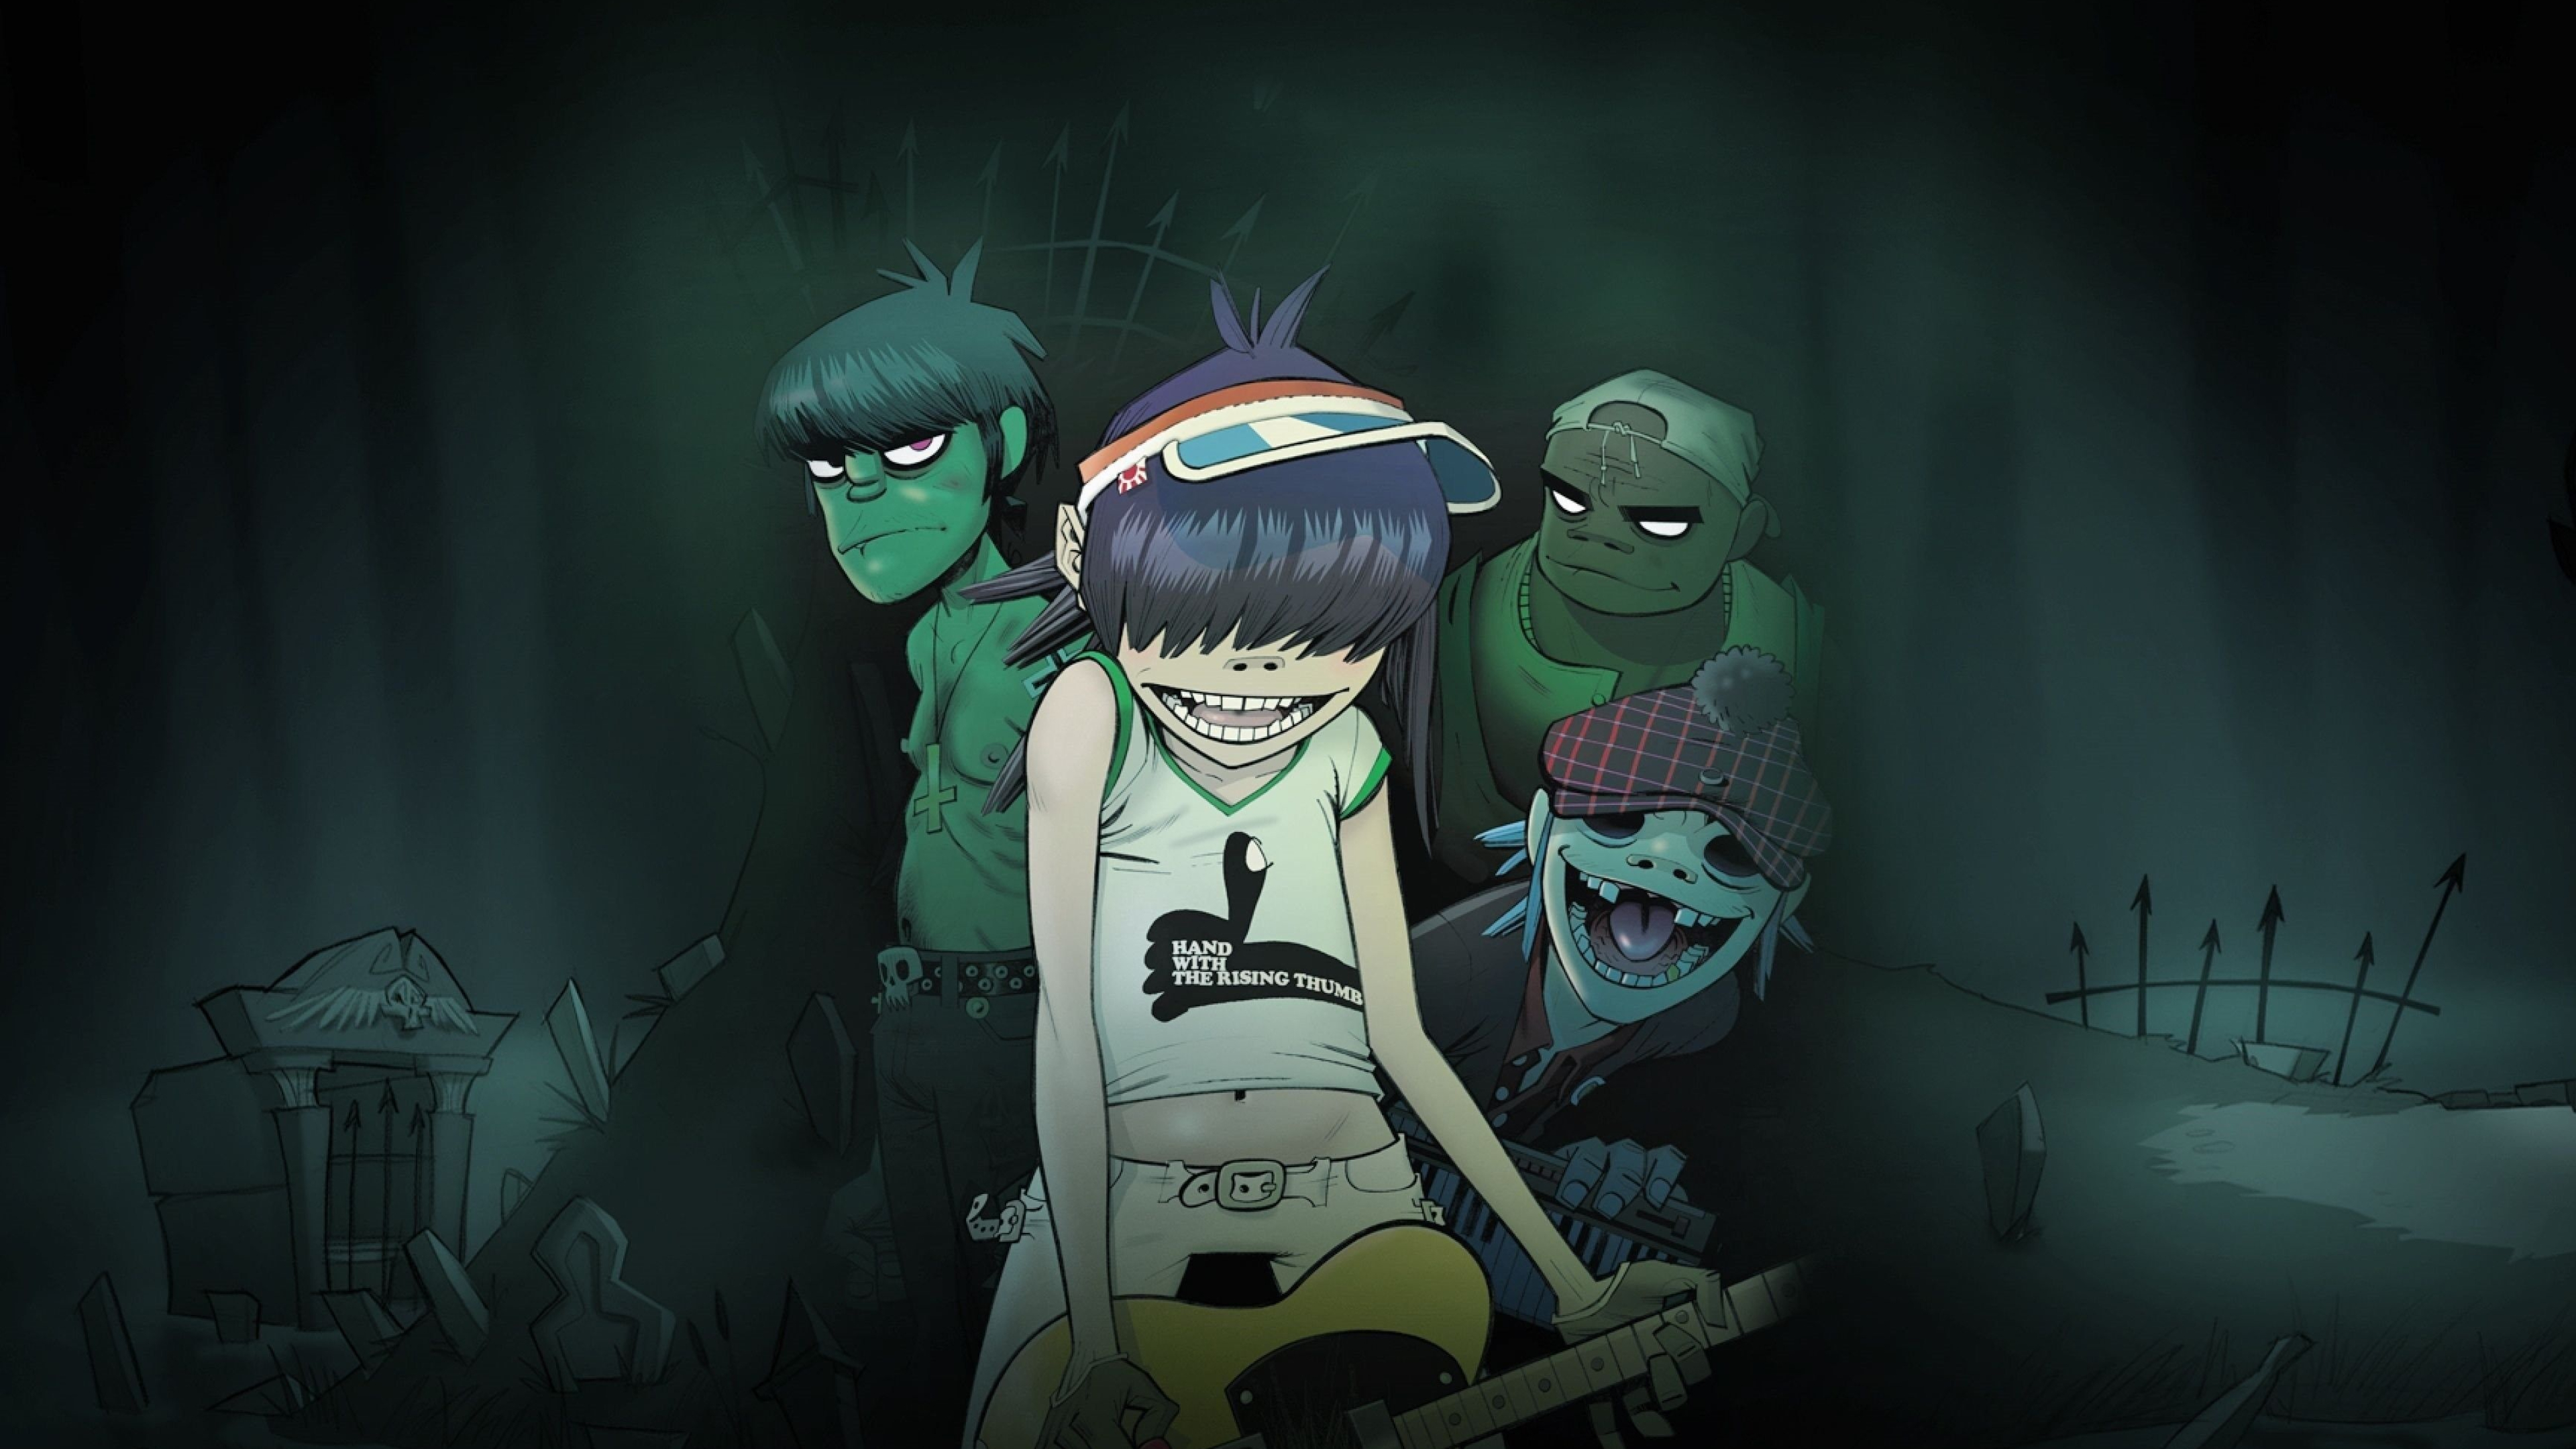 Noodle (Gorillaz): The beloved raunchy animated band members, 2-D, Murdoc Niccals, Russel Hobbs. 3840x2160 4K Wallpaper.